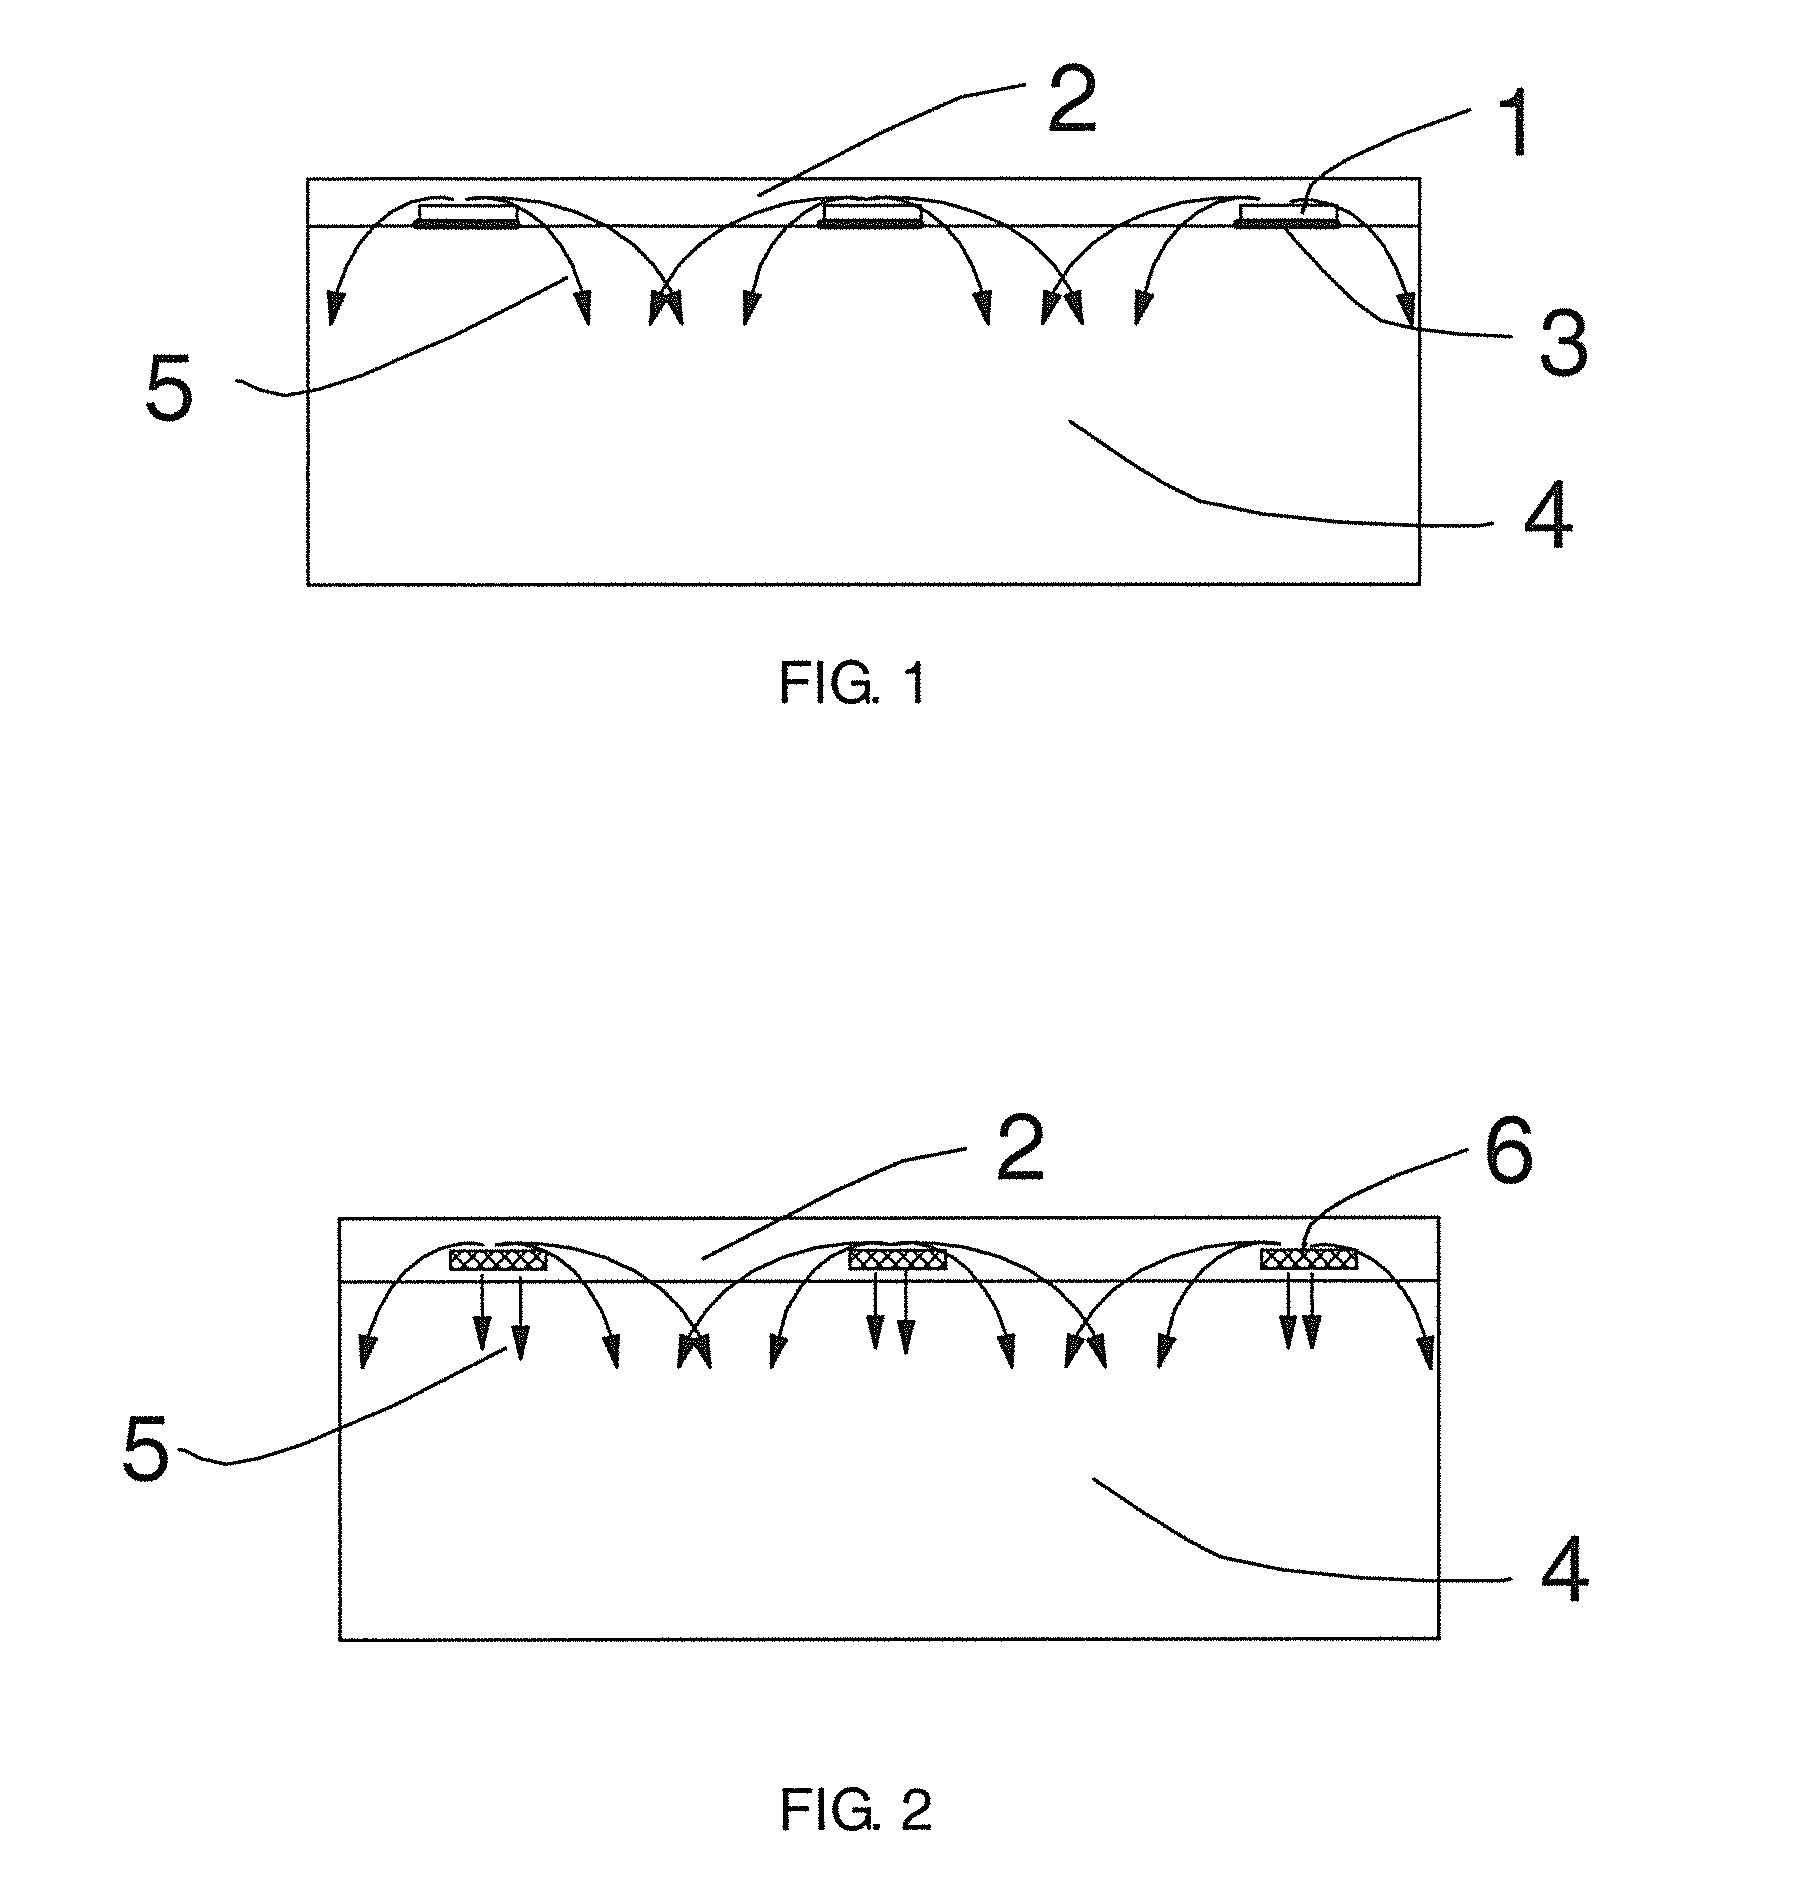 Cathodic protection current distribution method and apparatus for corrosion control of reinforcing steel in concrete structures